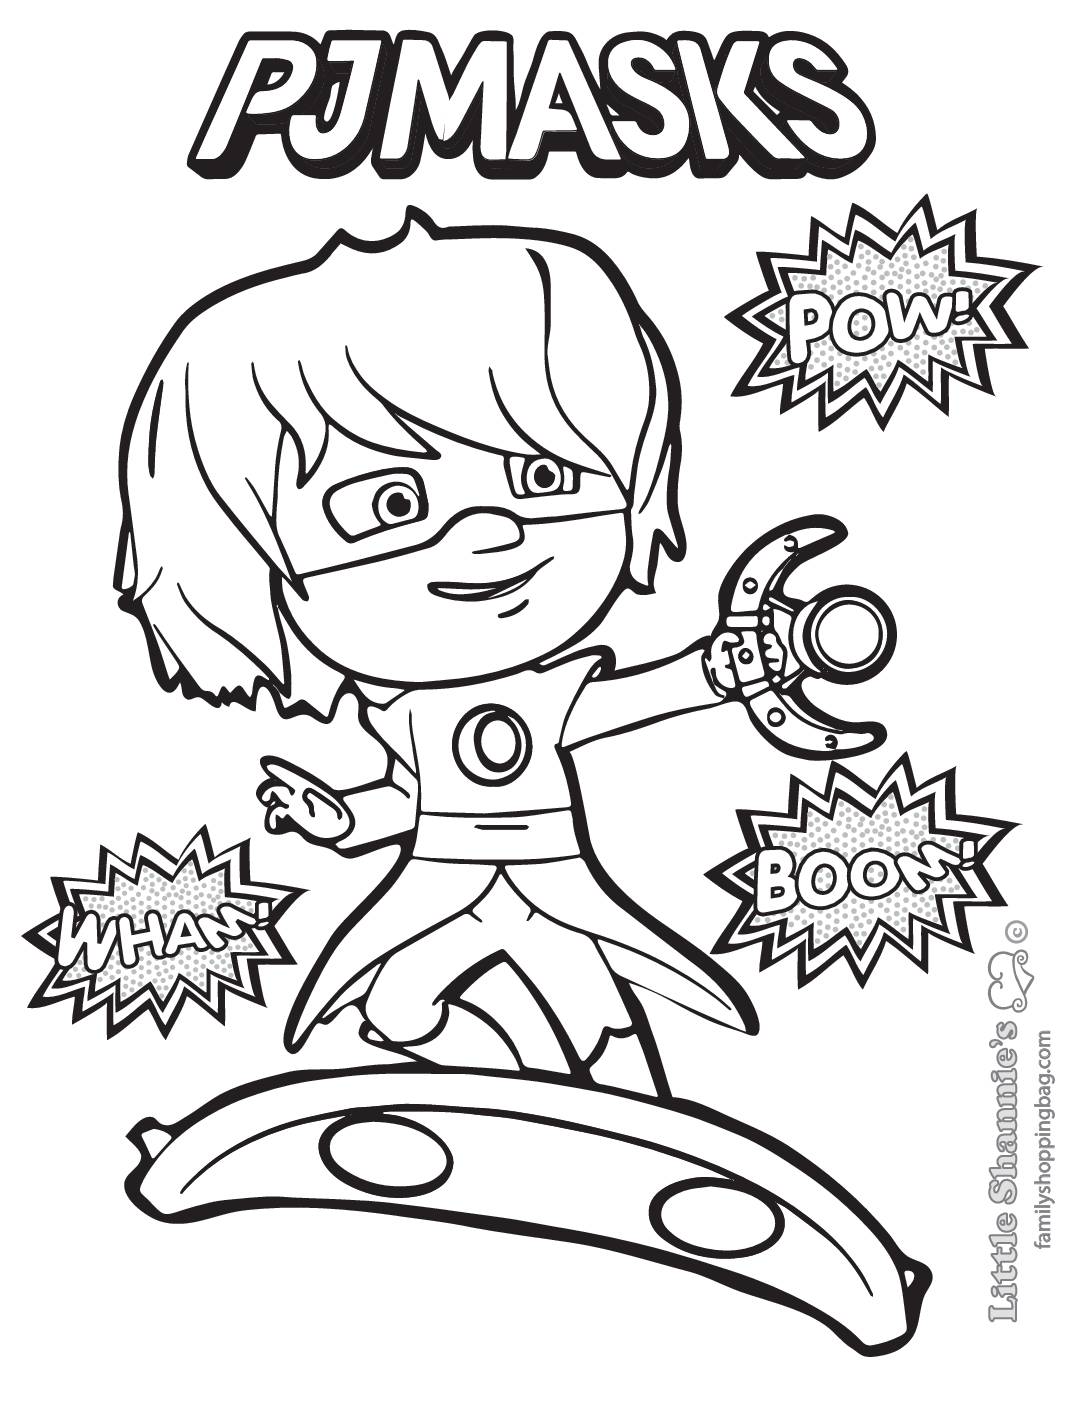 Coloring Page 6 PJ Masks Coloring Pages